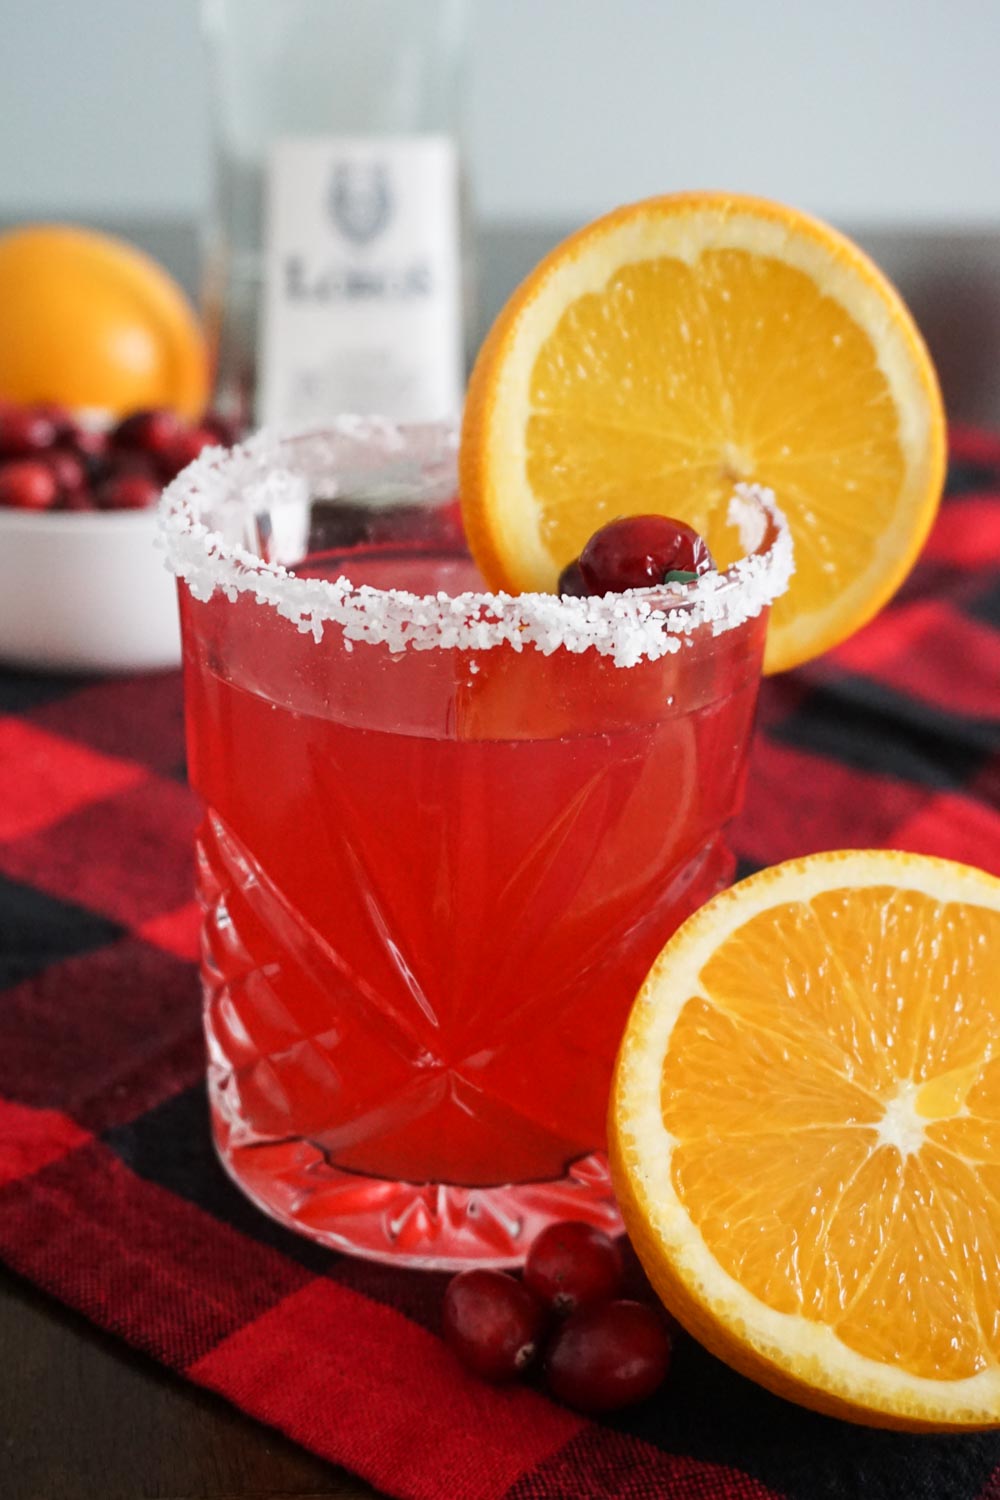 Cranberry orange margarita made with Lobos 1707 Tequila, Joven (pictured in background) in a festive Christmasy setting with red buffalo check tablecloth, navel oranges, and fresh cranberries